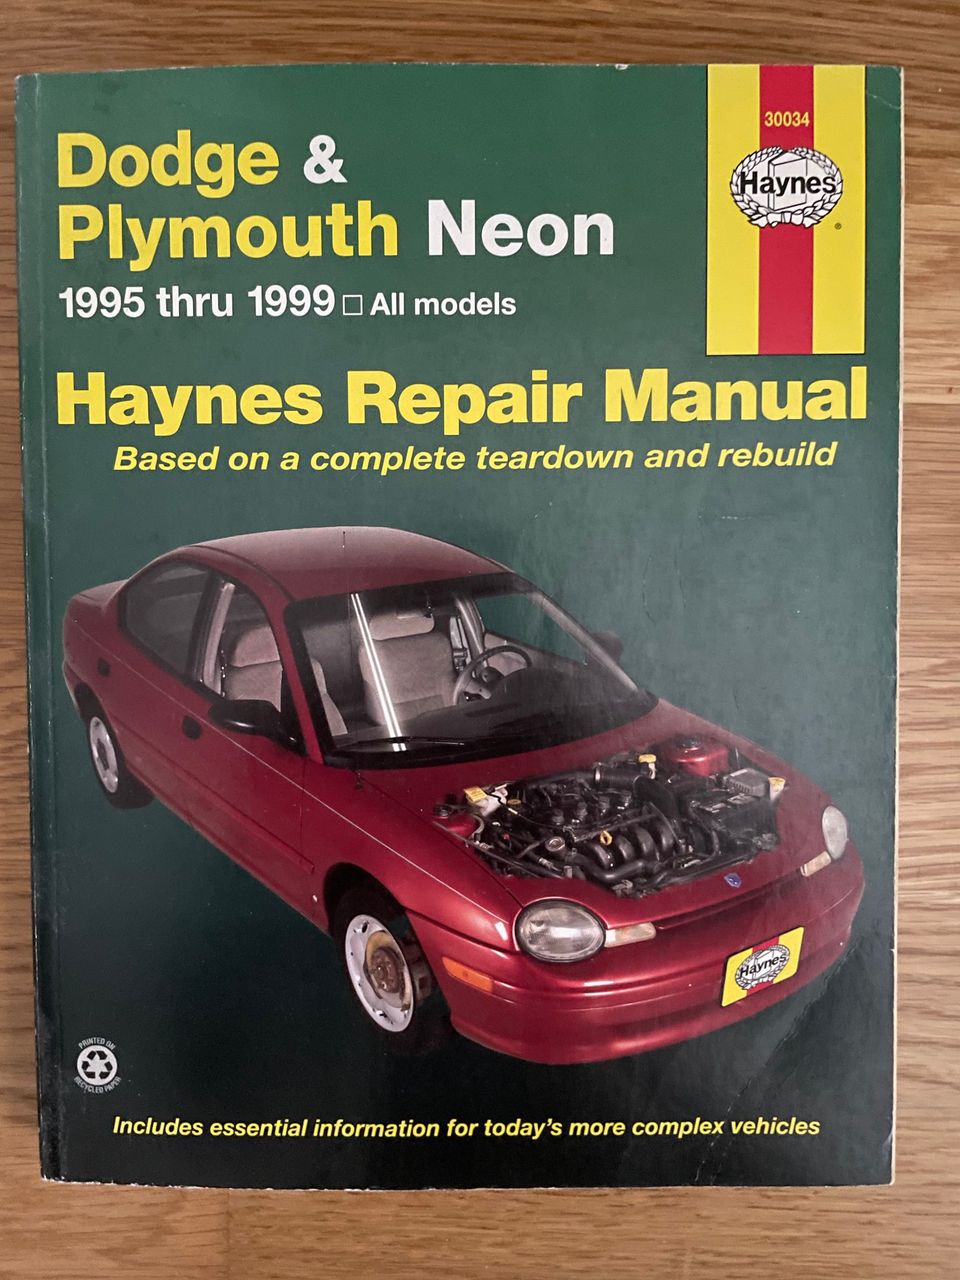 Dodge & Plymouth Neon 1995-1999